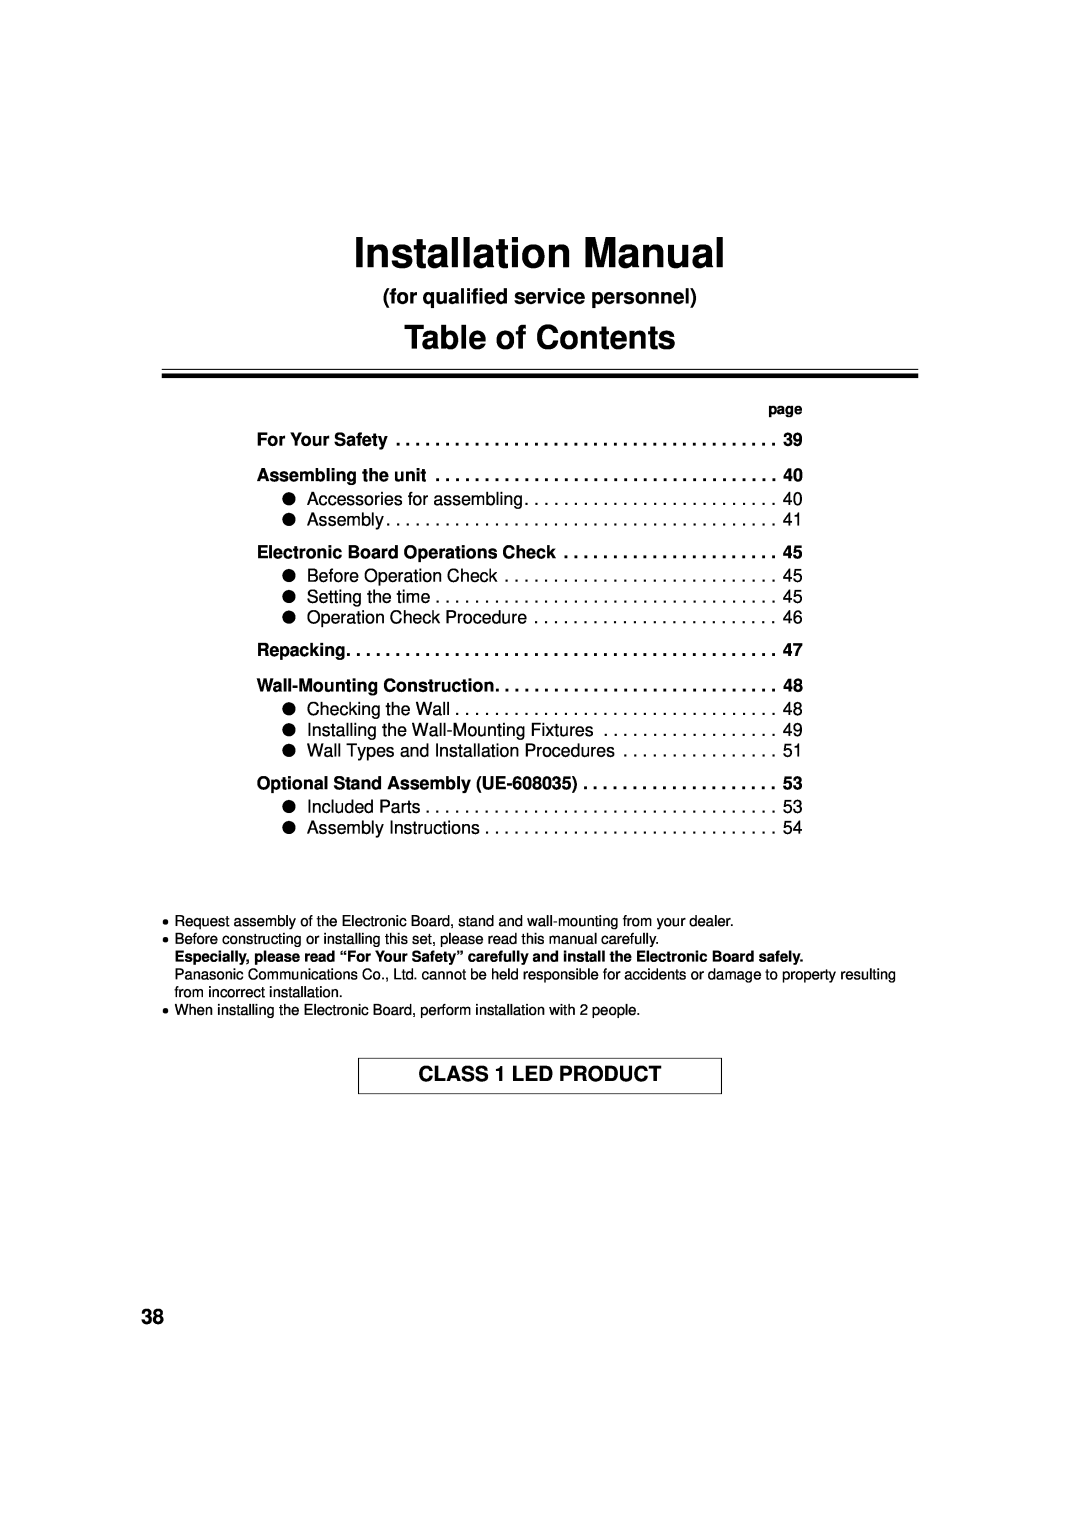 Panasonic UB-5838C, UB-5338C for qualified service personnel, CLASS 1 LED PRODUCT, Installation Manual, Table of Contents 